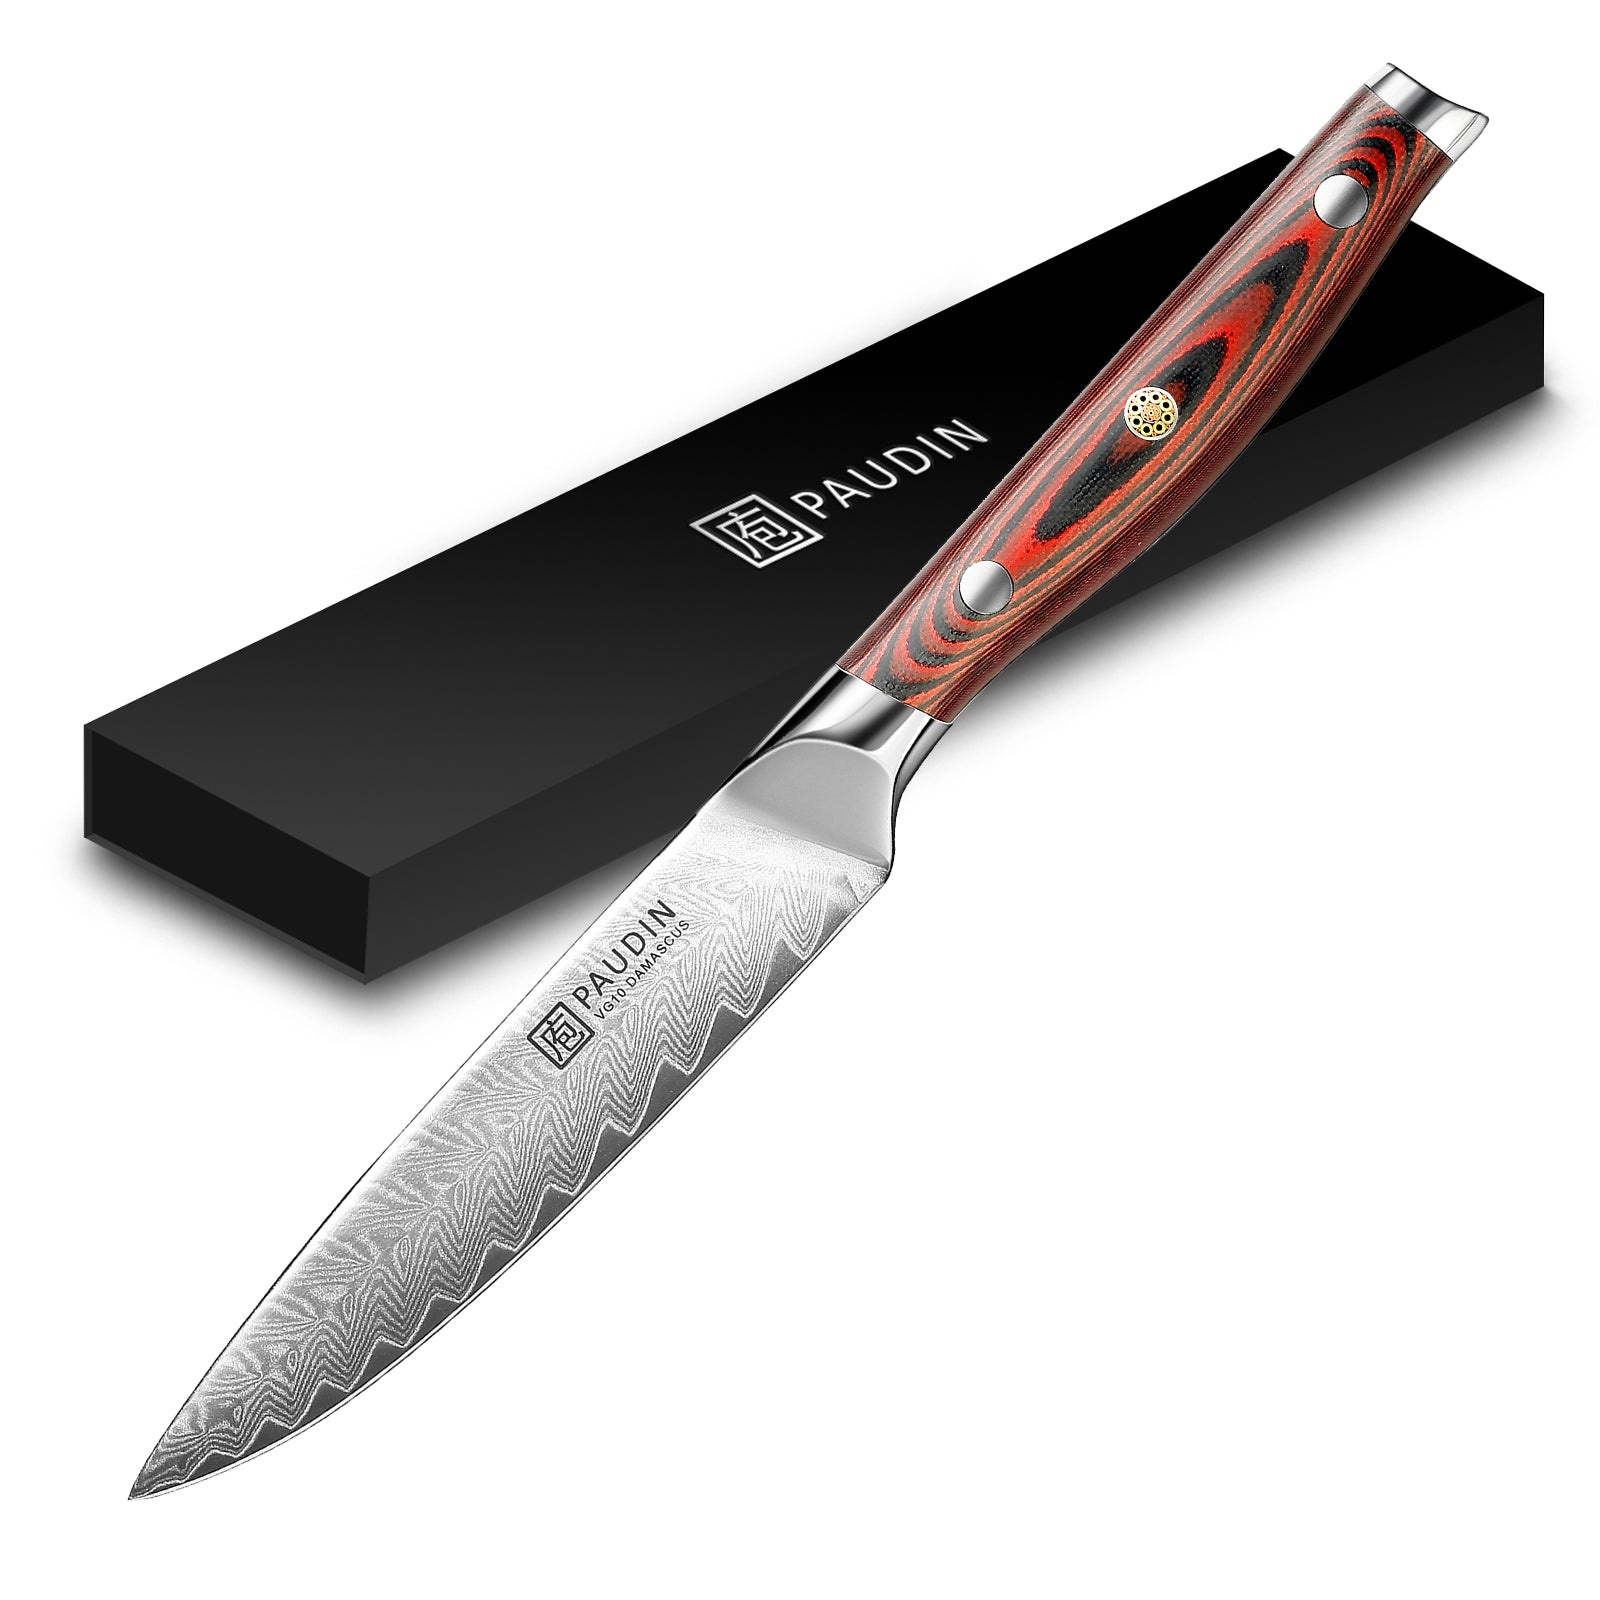 OAKSWARE 5.5-Inch Kitchen Utility Knife, German Stainless Steel, Full Tang,  Paring Knife Kitchen Knife Chef Knife for Cutting, Peeling, Slicing Fruit